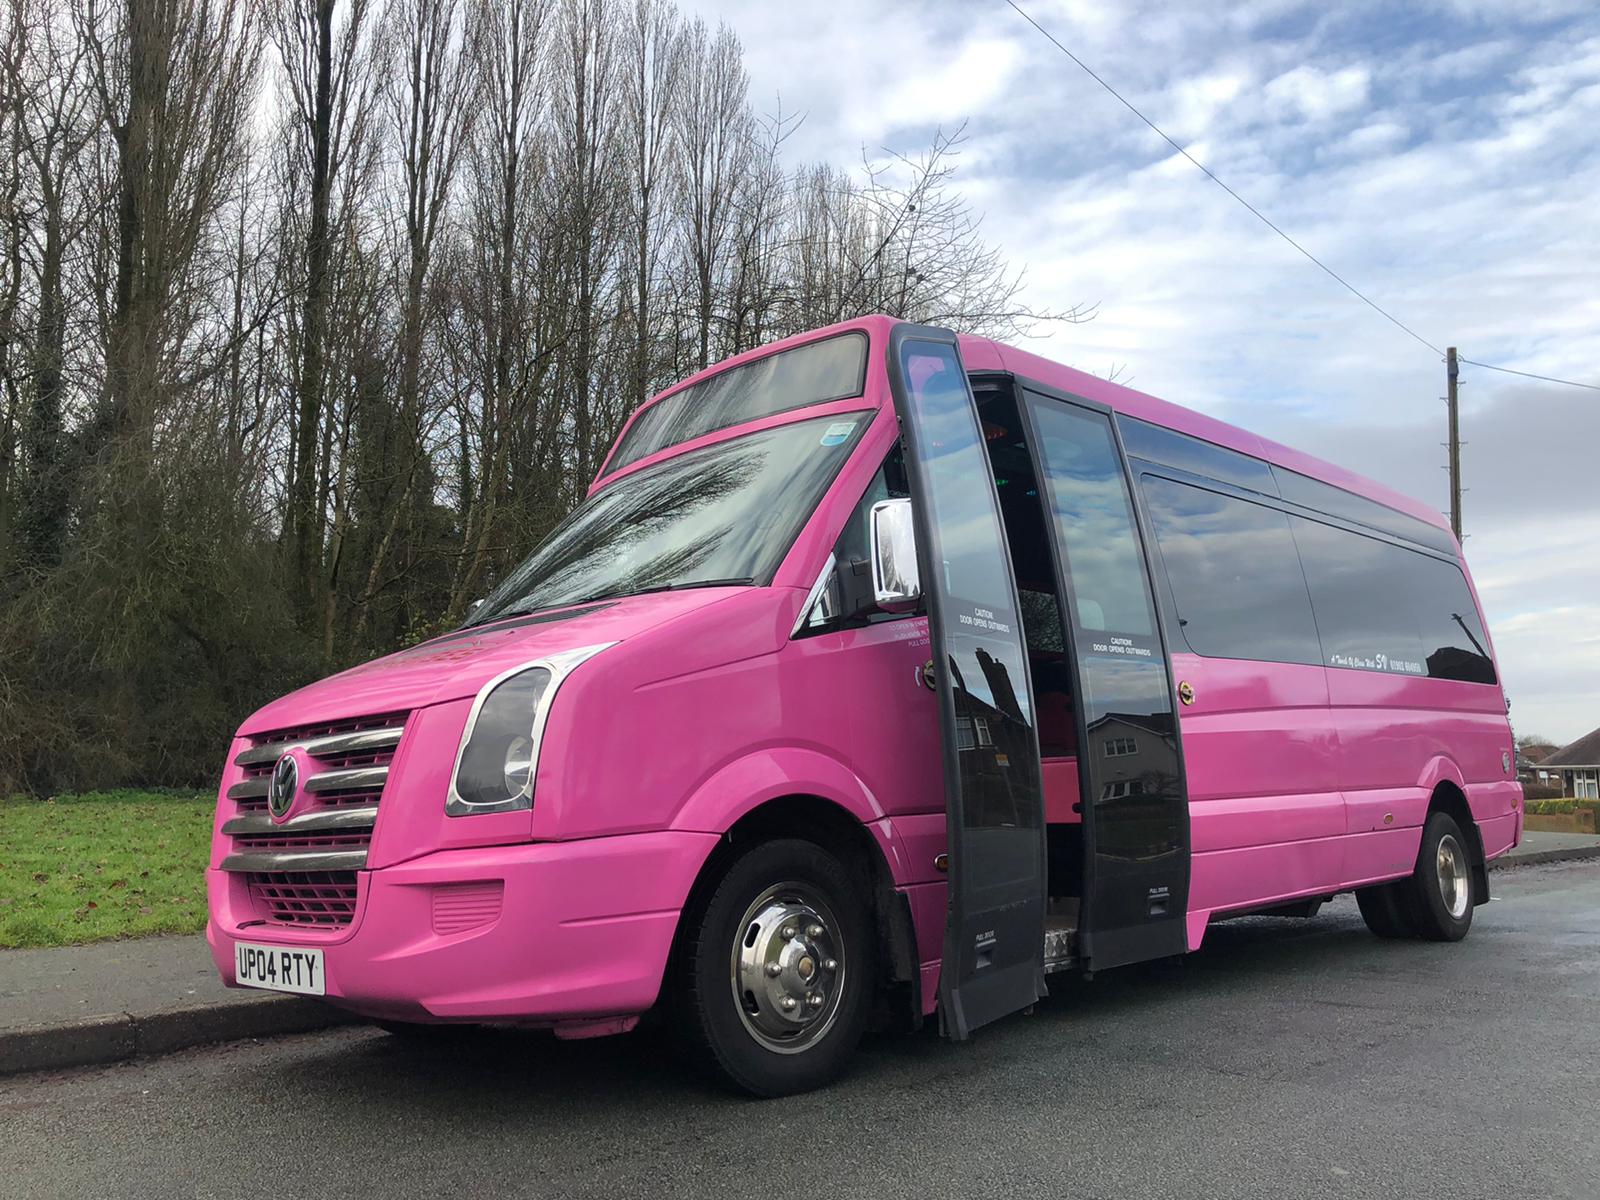 Maximising Fun: Essential Features to Look for in a Greater London Party Bus Hire